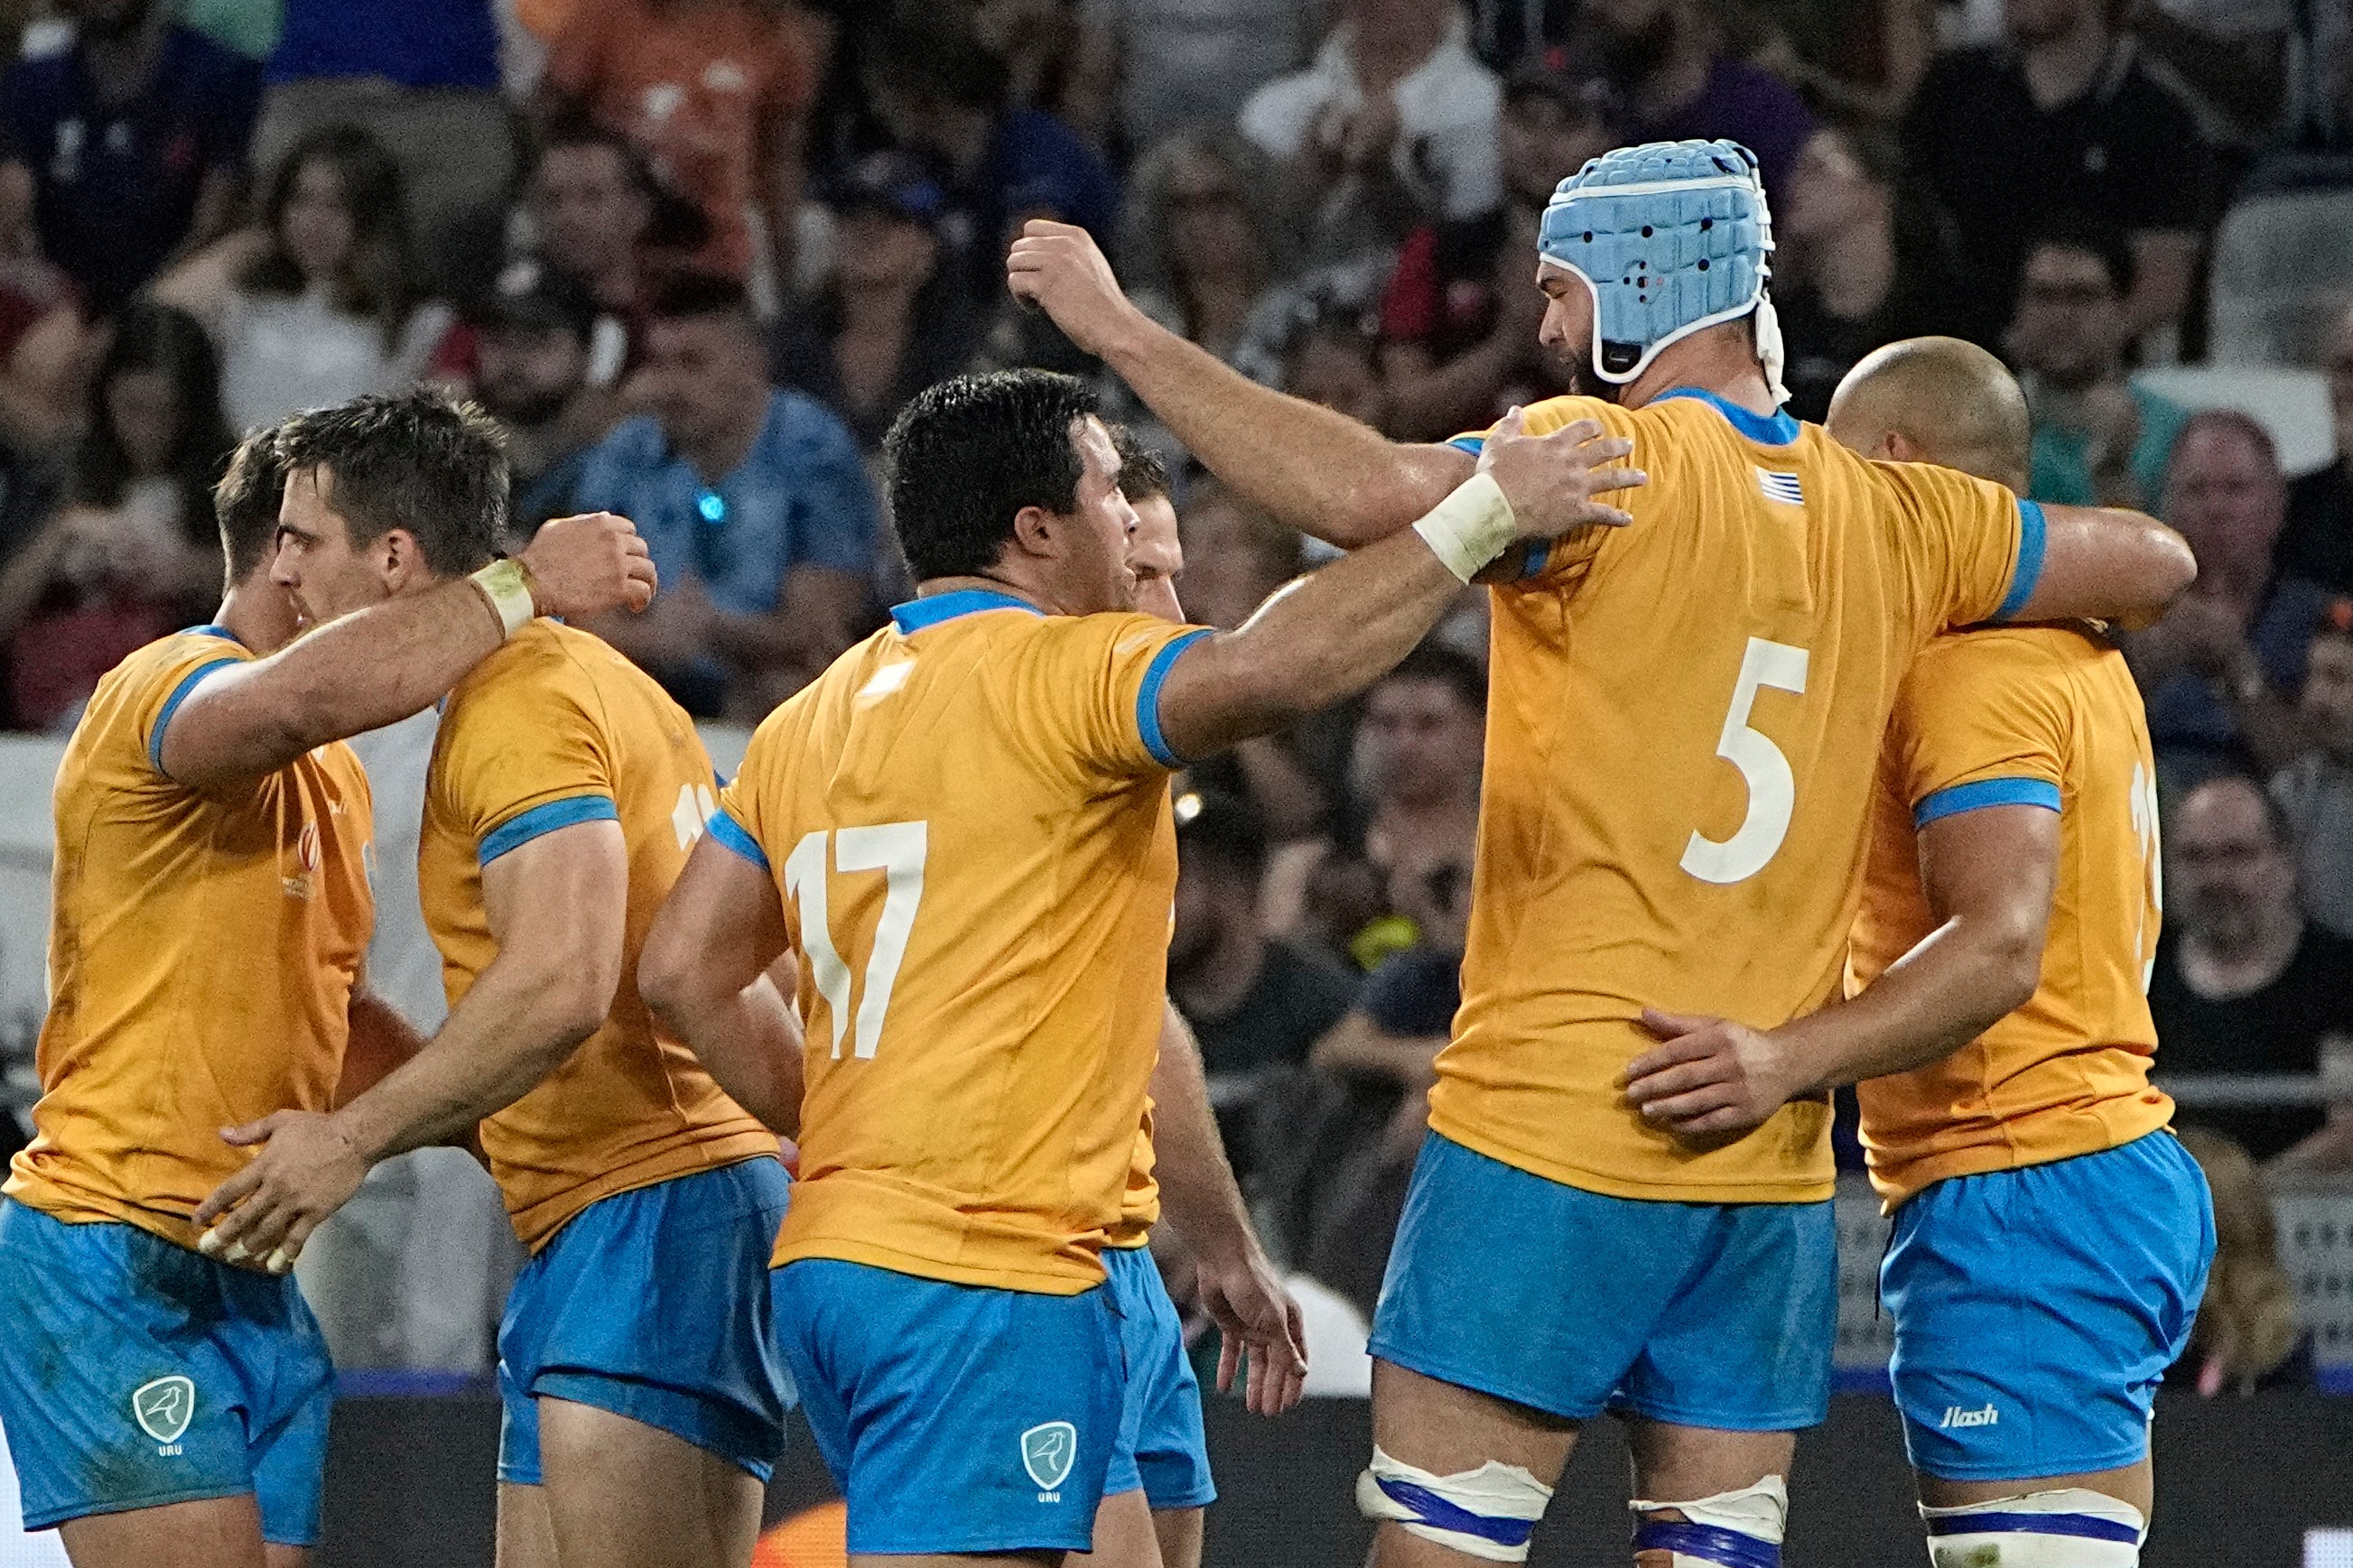 Uruguay win their first World Cup match against Namibia